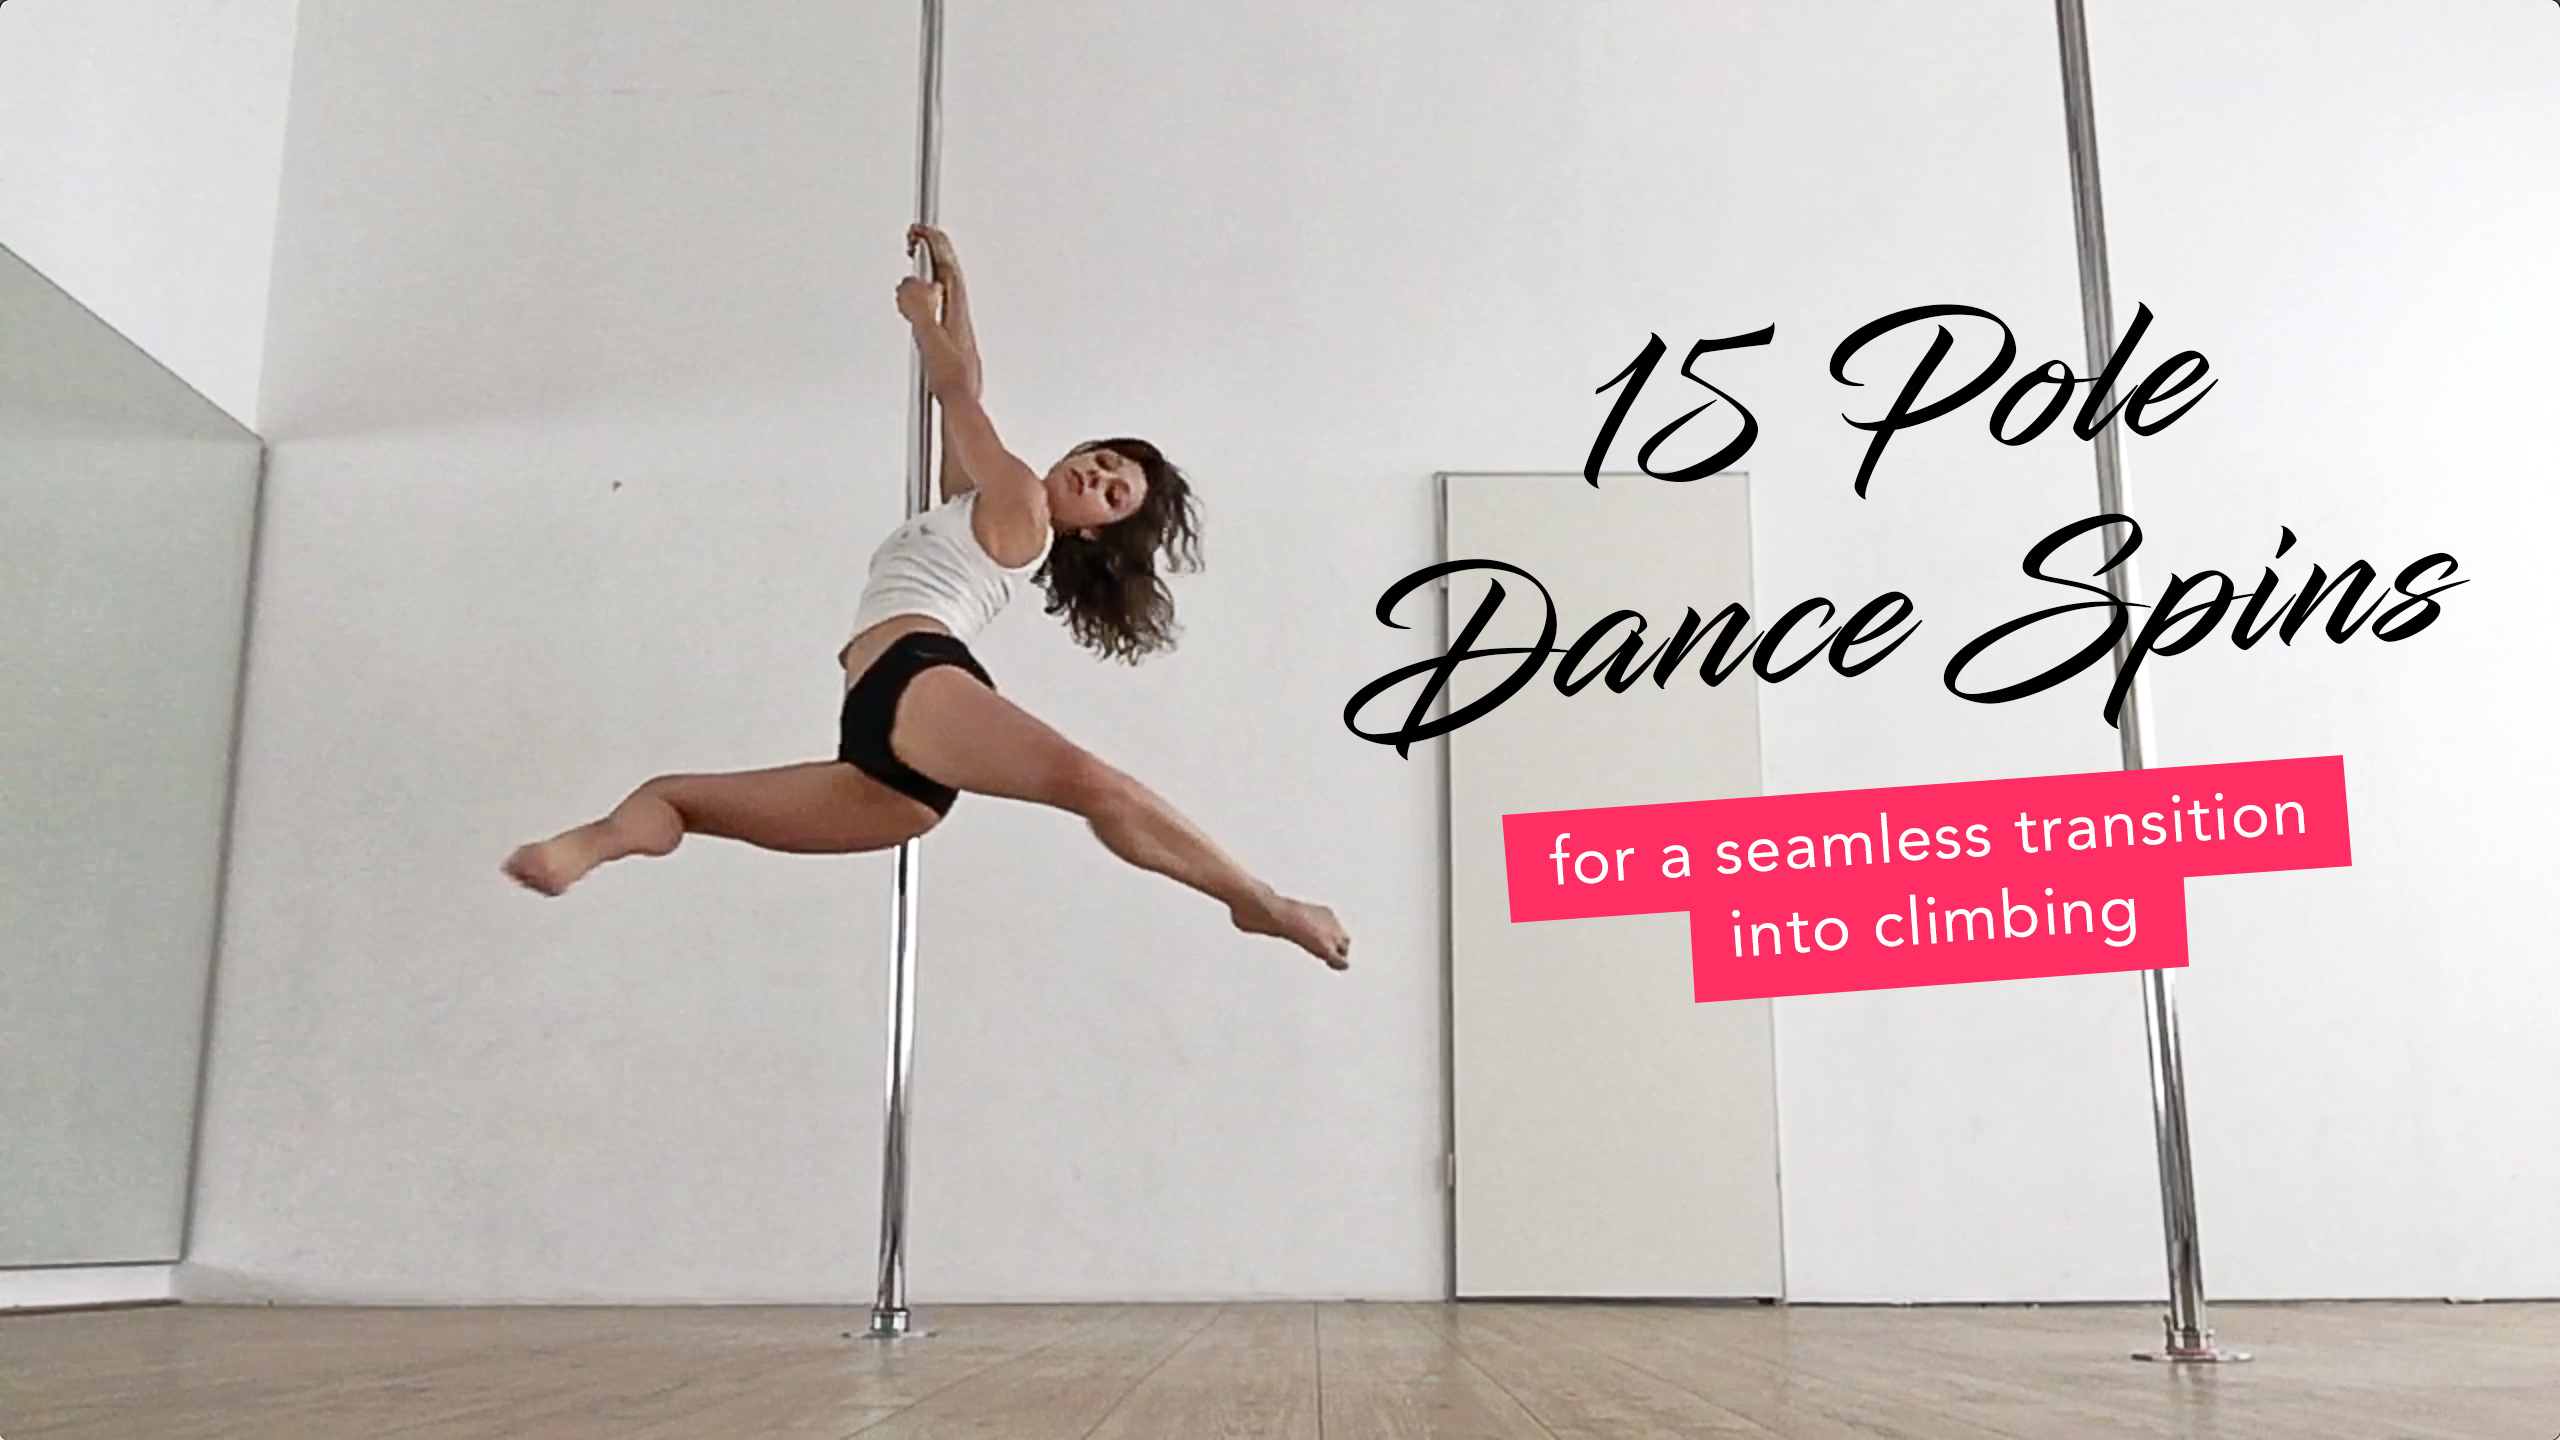 15 pole dance spins that will make you better at spinning • The Pole Dancer